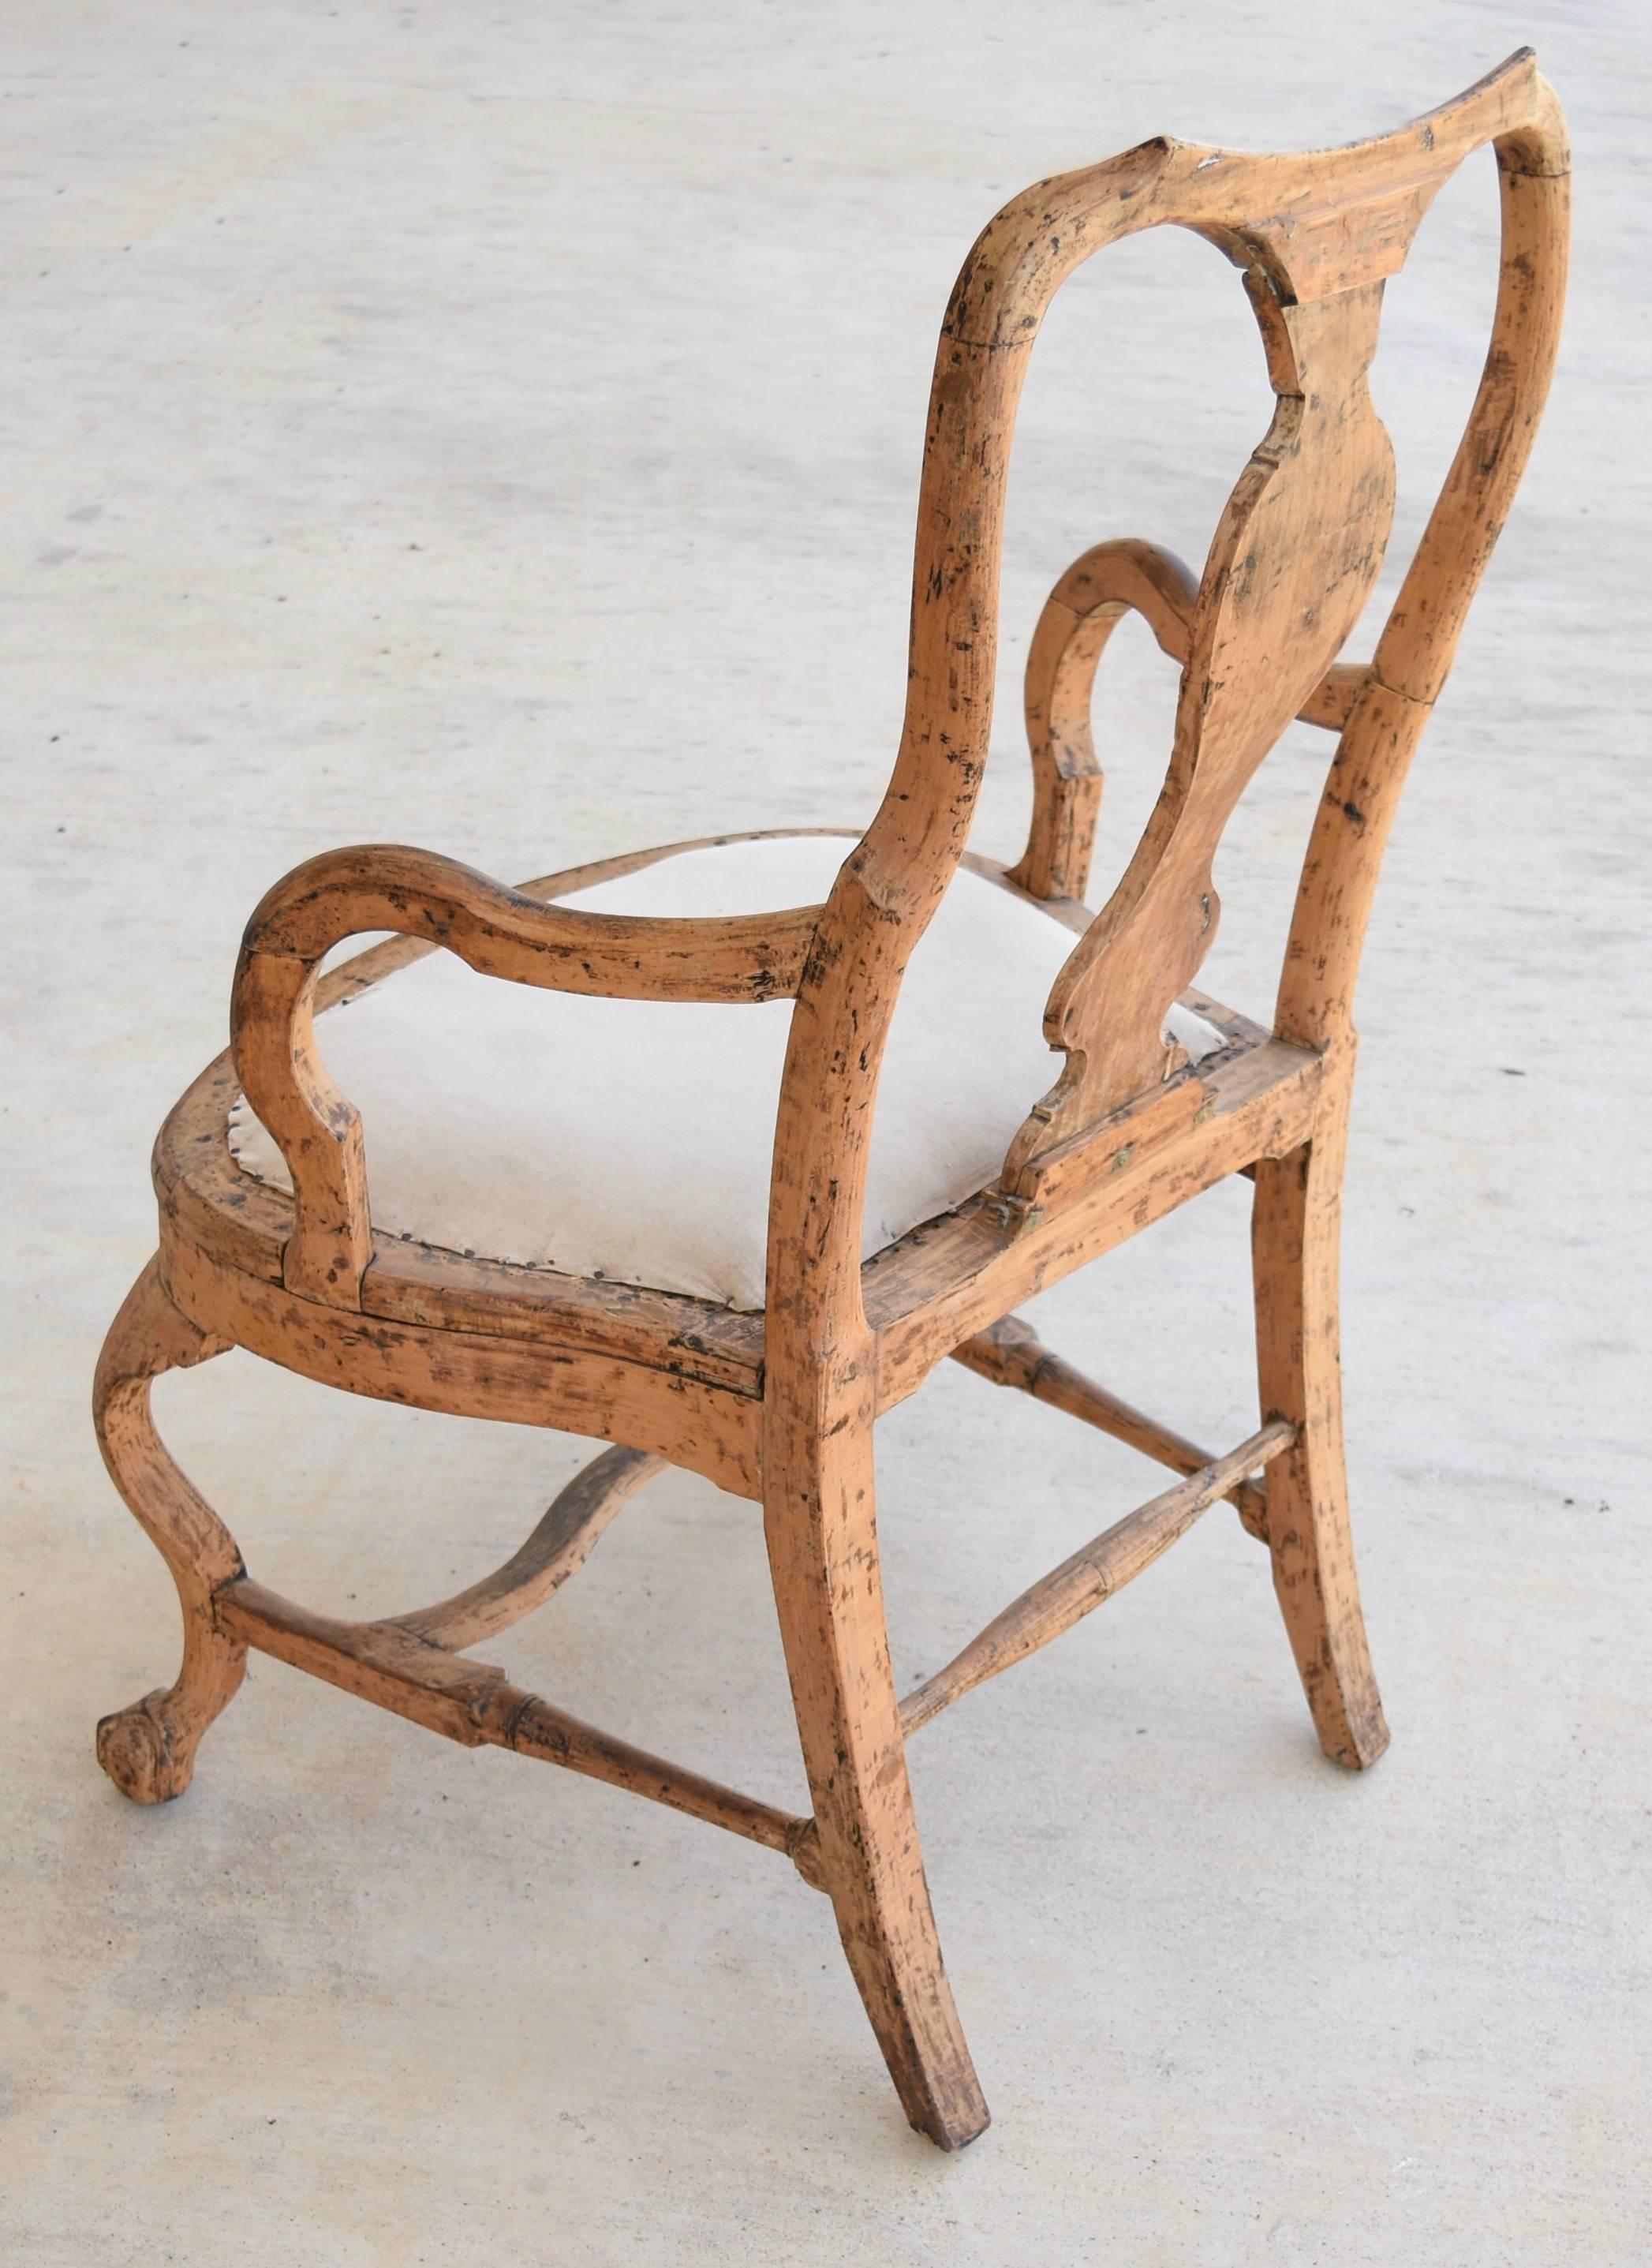 This is a large-scale, beautifully made, pegged and carved wood chair from Sweden that has it's original finish. Any angle you place it is sculpturally gorgeous. It has ball and claw front feet, sweeping curved arm, bottom stretcher and features a